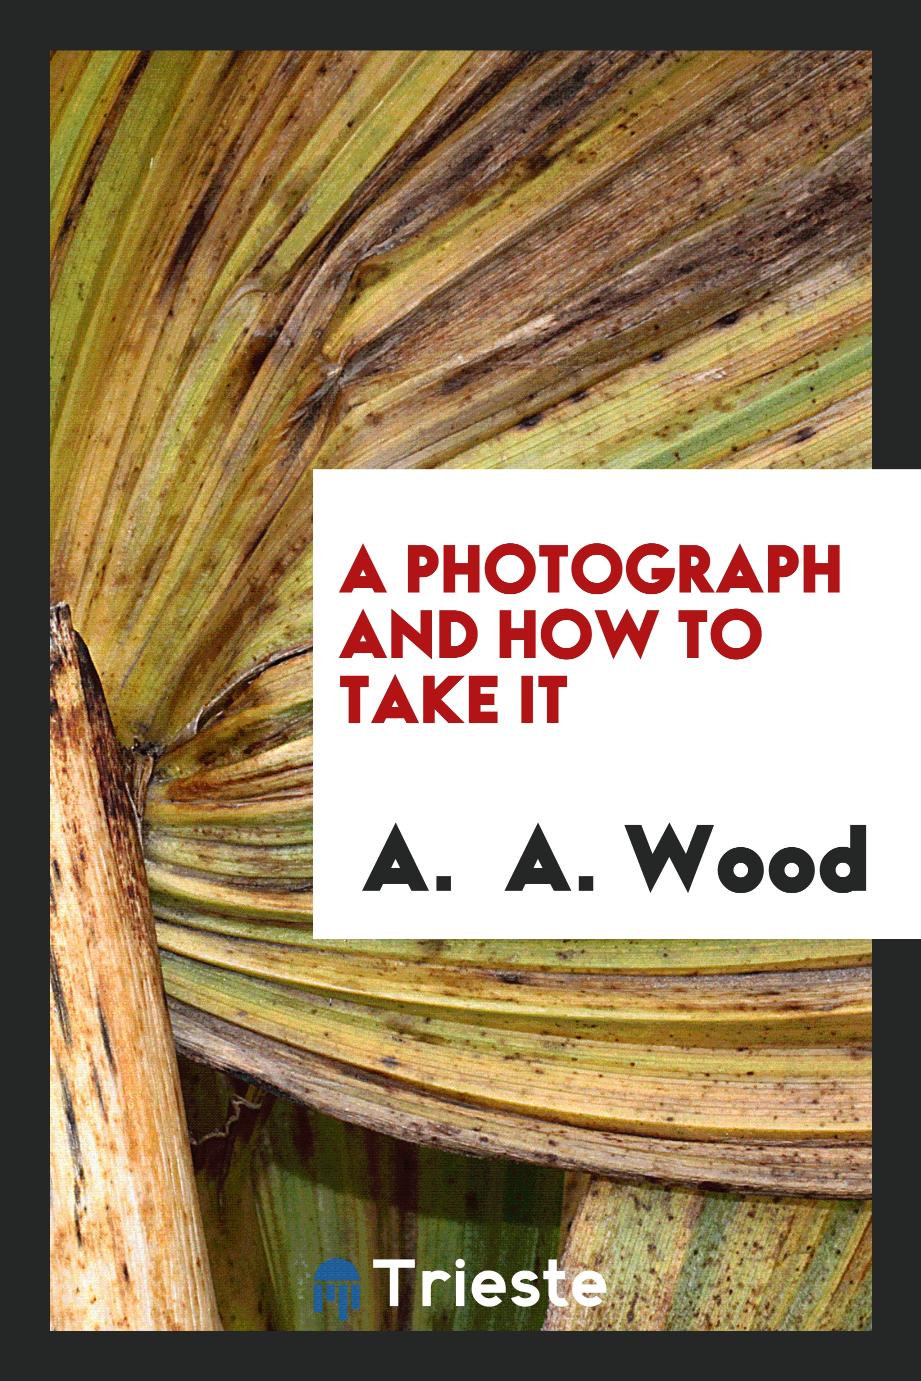 A Photograph and how to Take it